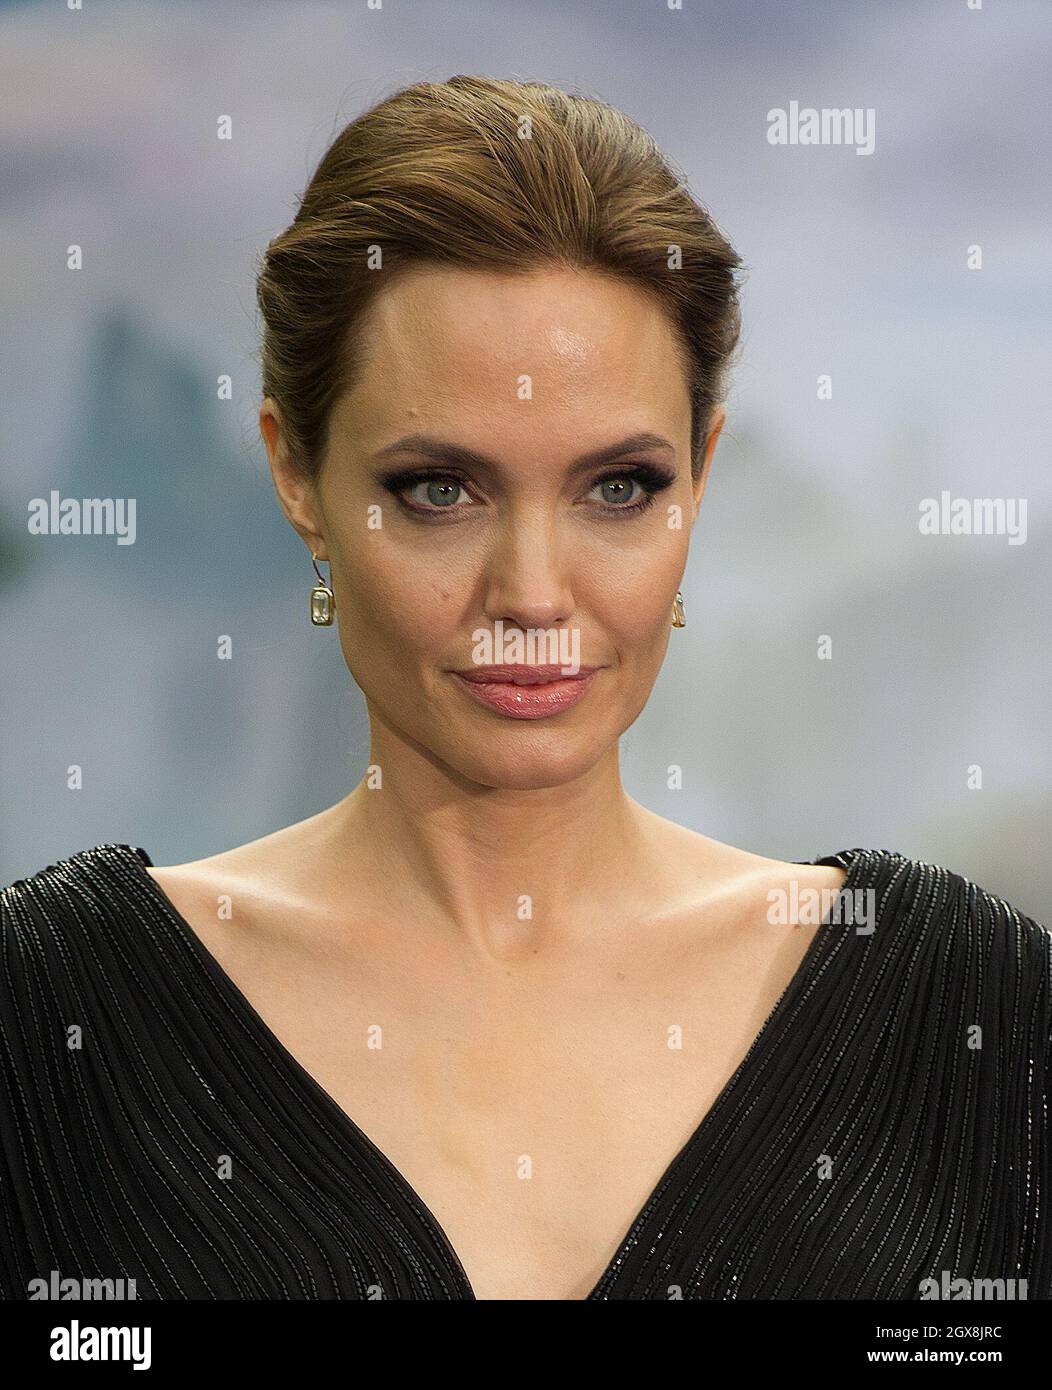 Angelina Jolie attends a private reception as costumes and props from Disney's 'Maleficent' are exhibited in support of Great Ormond Street Hospital at Kensington Palace in London. Stock Photo